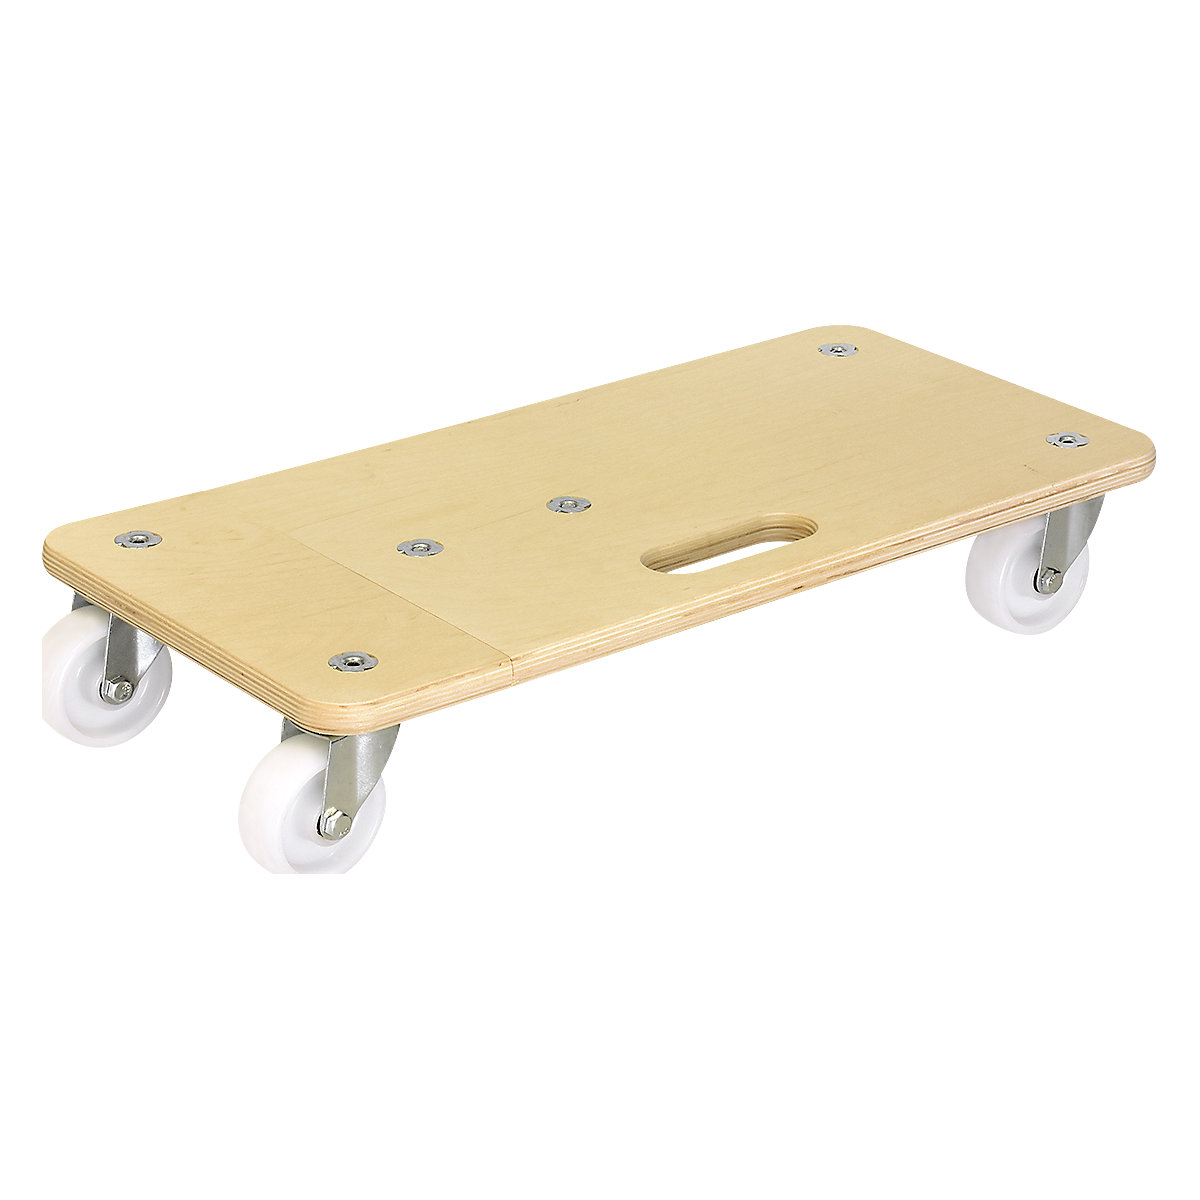 MM 1331 extendable transport dolly – Wagner, LxW 587 – 857 x 290 mm, max. load 200 kg, 2+ items-5